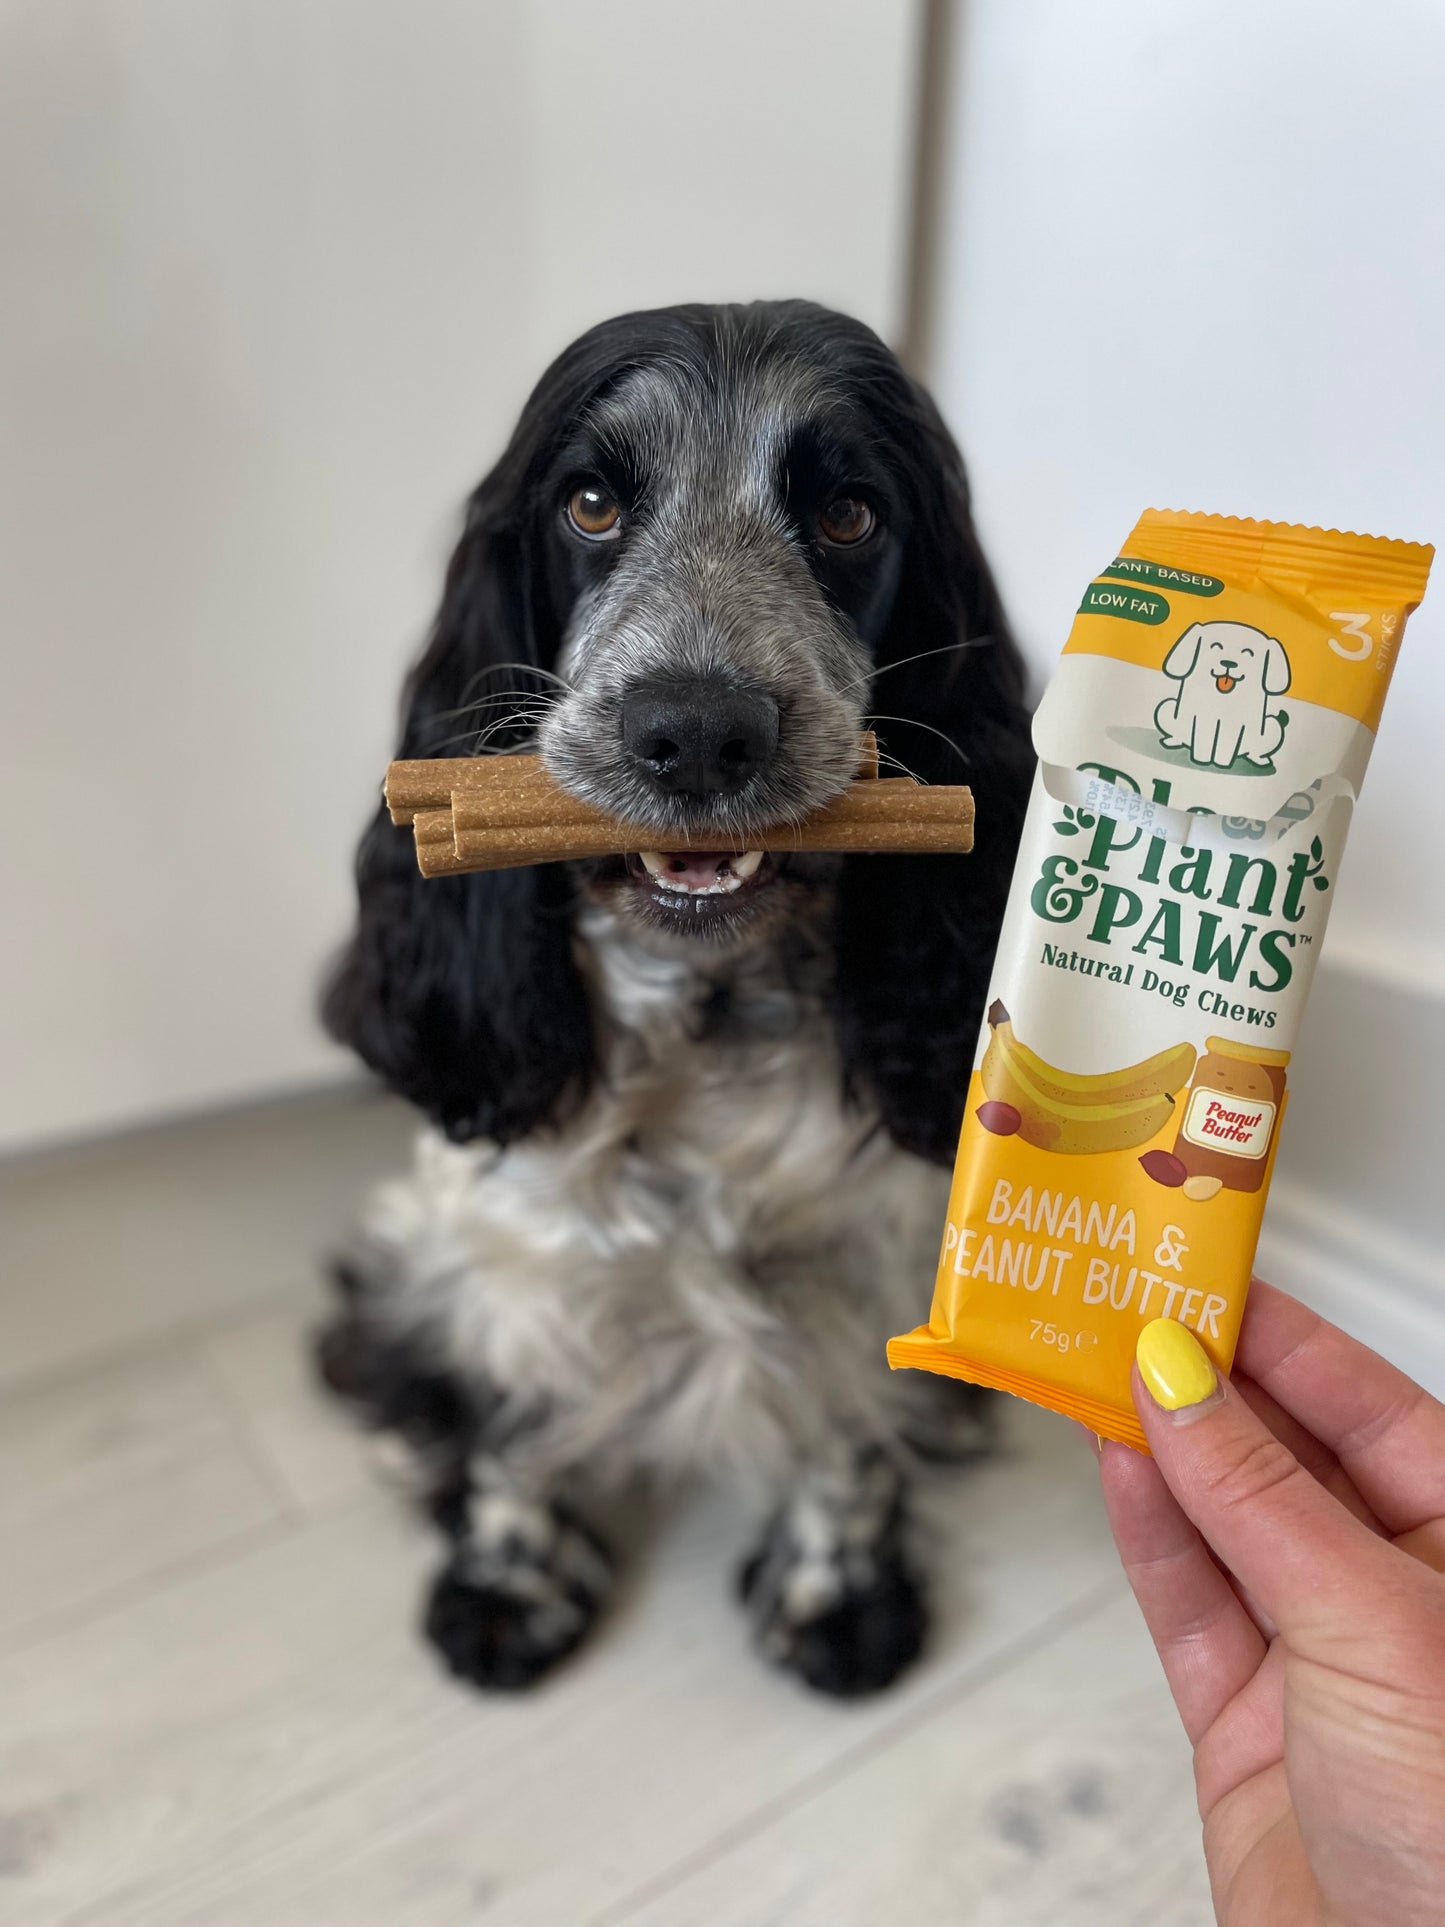 10 Pack Dog Chews Banana and Peanut Butter